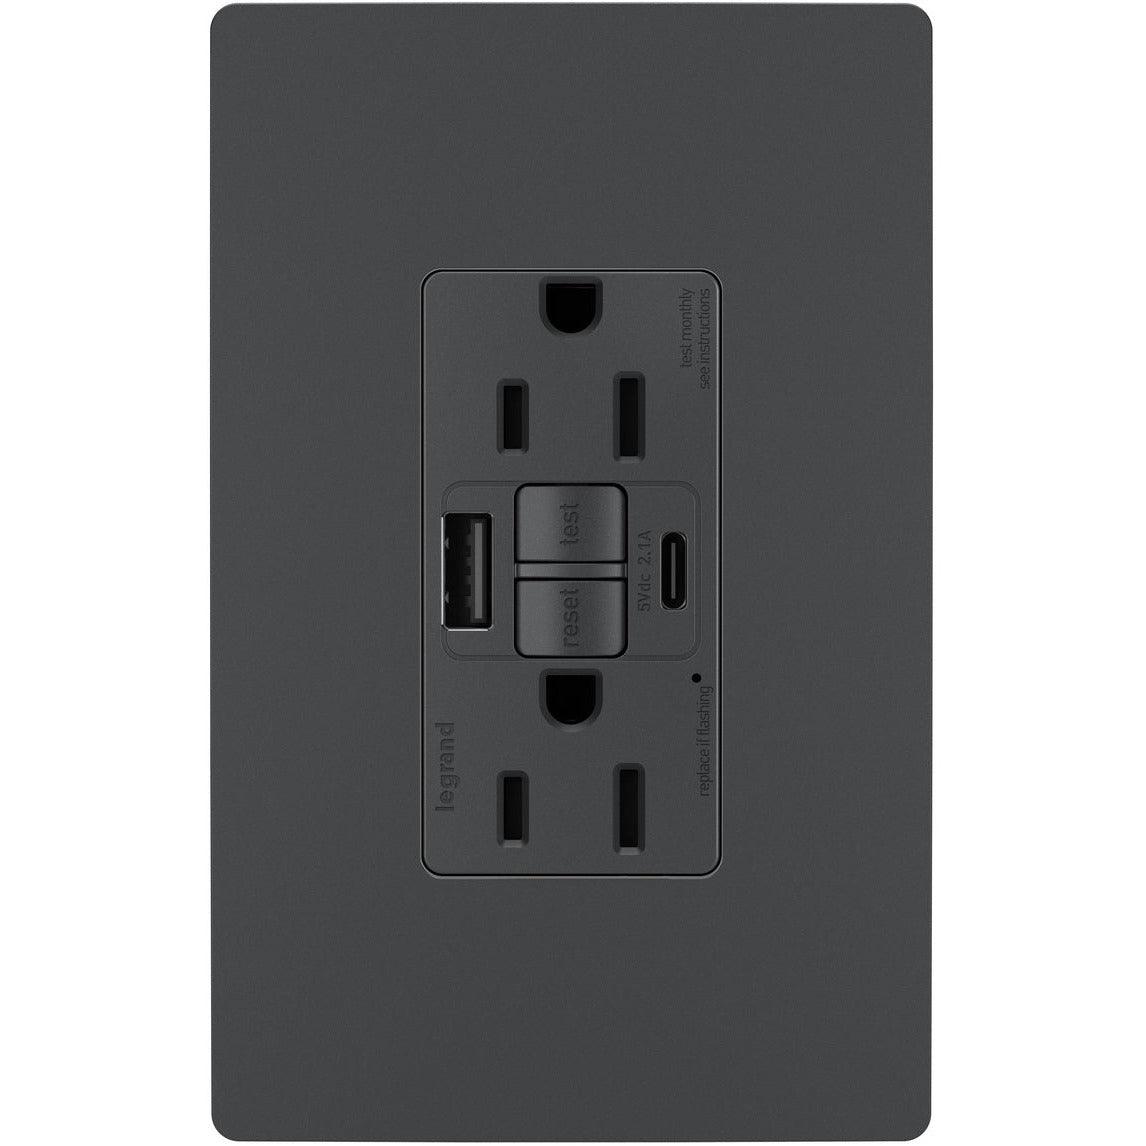 Legrand Radiant - radiant® 15A Tamper Resistant Self Test GFCI USB Type AC Outlet - 1597TRUSBACGC4 | Montreal Lighting & Hardware